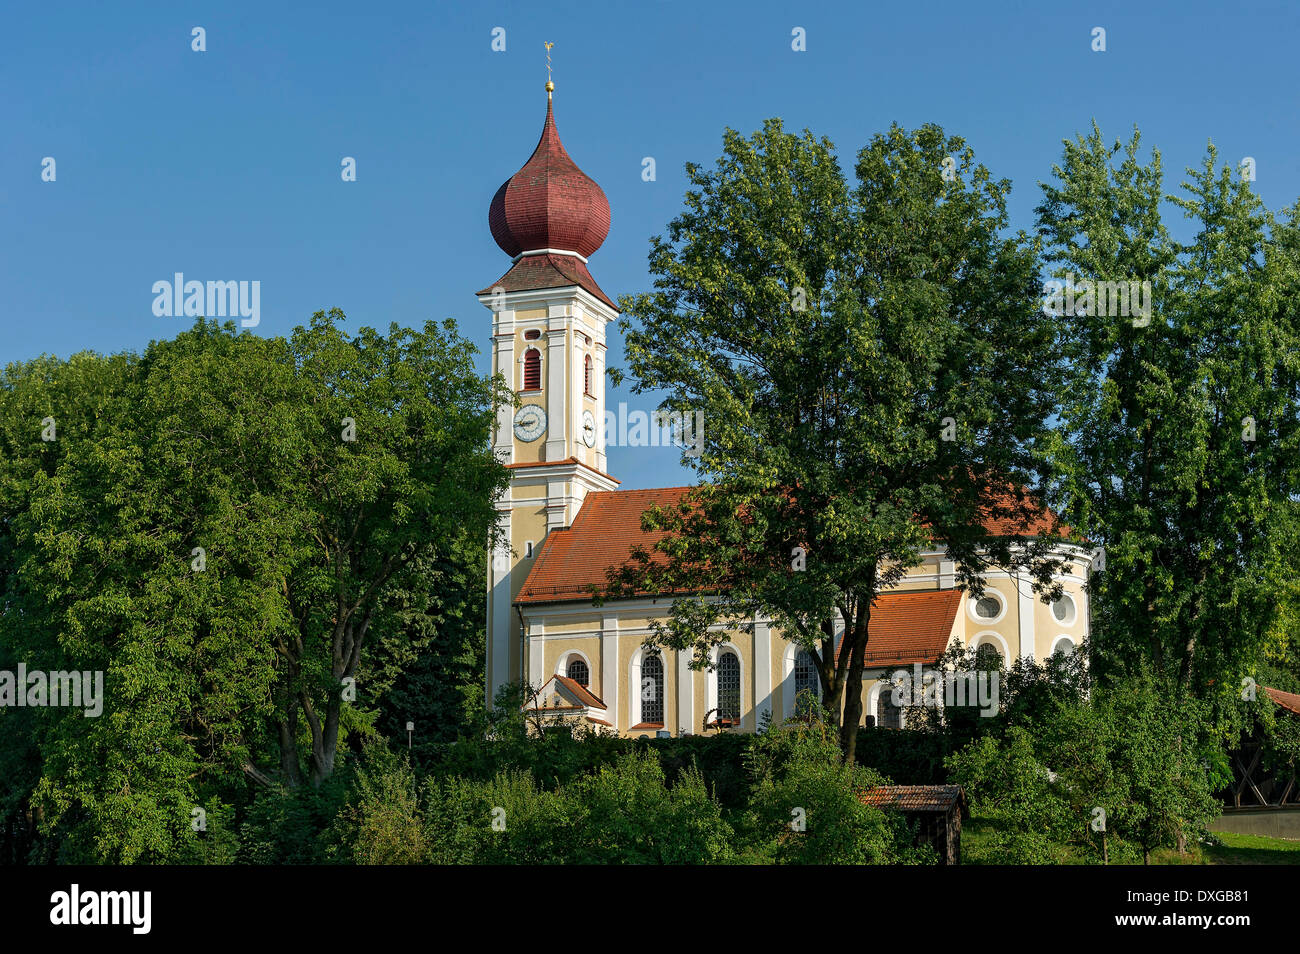 Subsidiary Church of St. Peter and Paul with onion dome, Kirchberg, Upper Bavaria, Bavaria, Germany Stock Photo